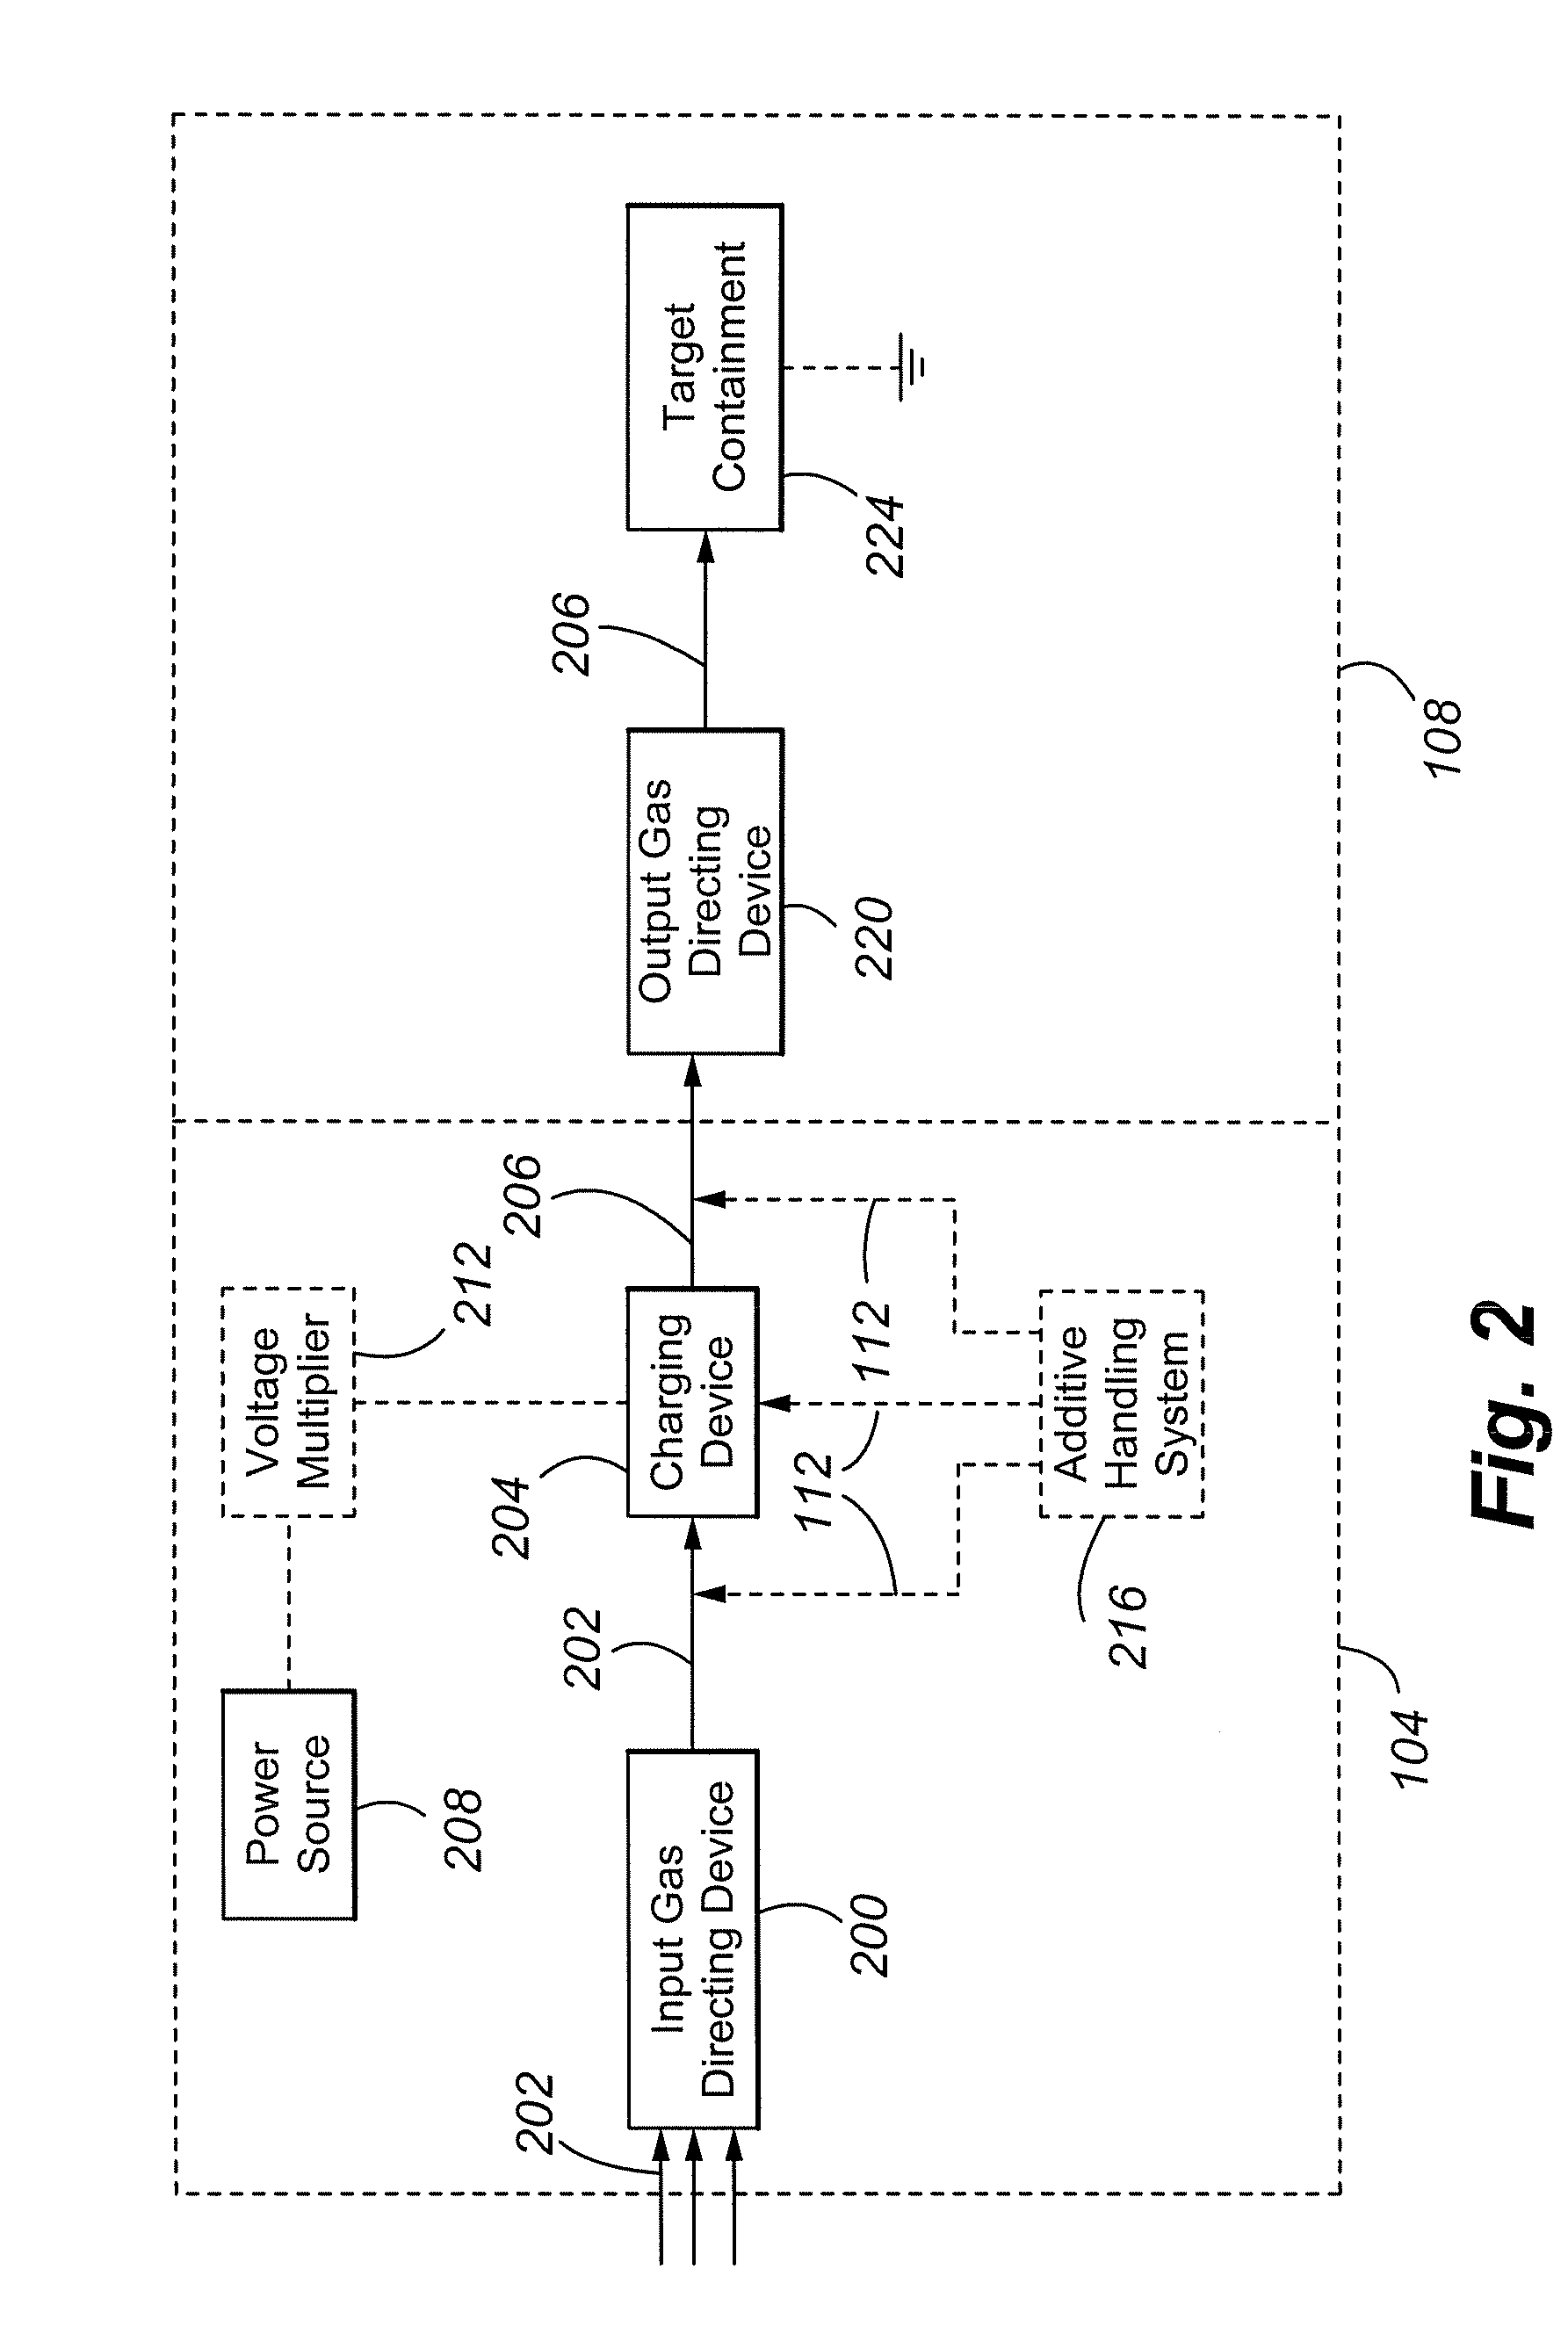 Electrotherapeutic treatment device and method